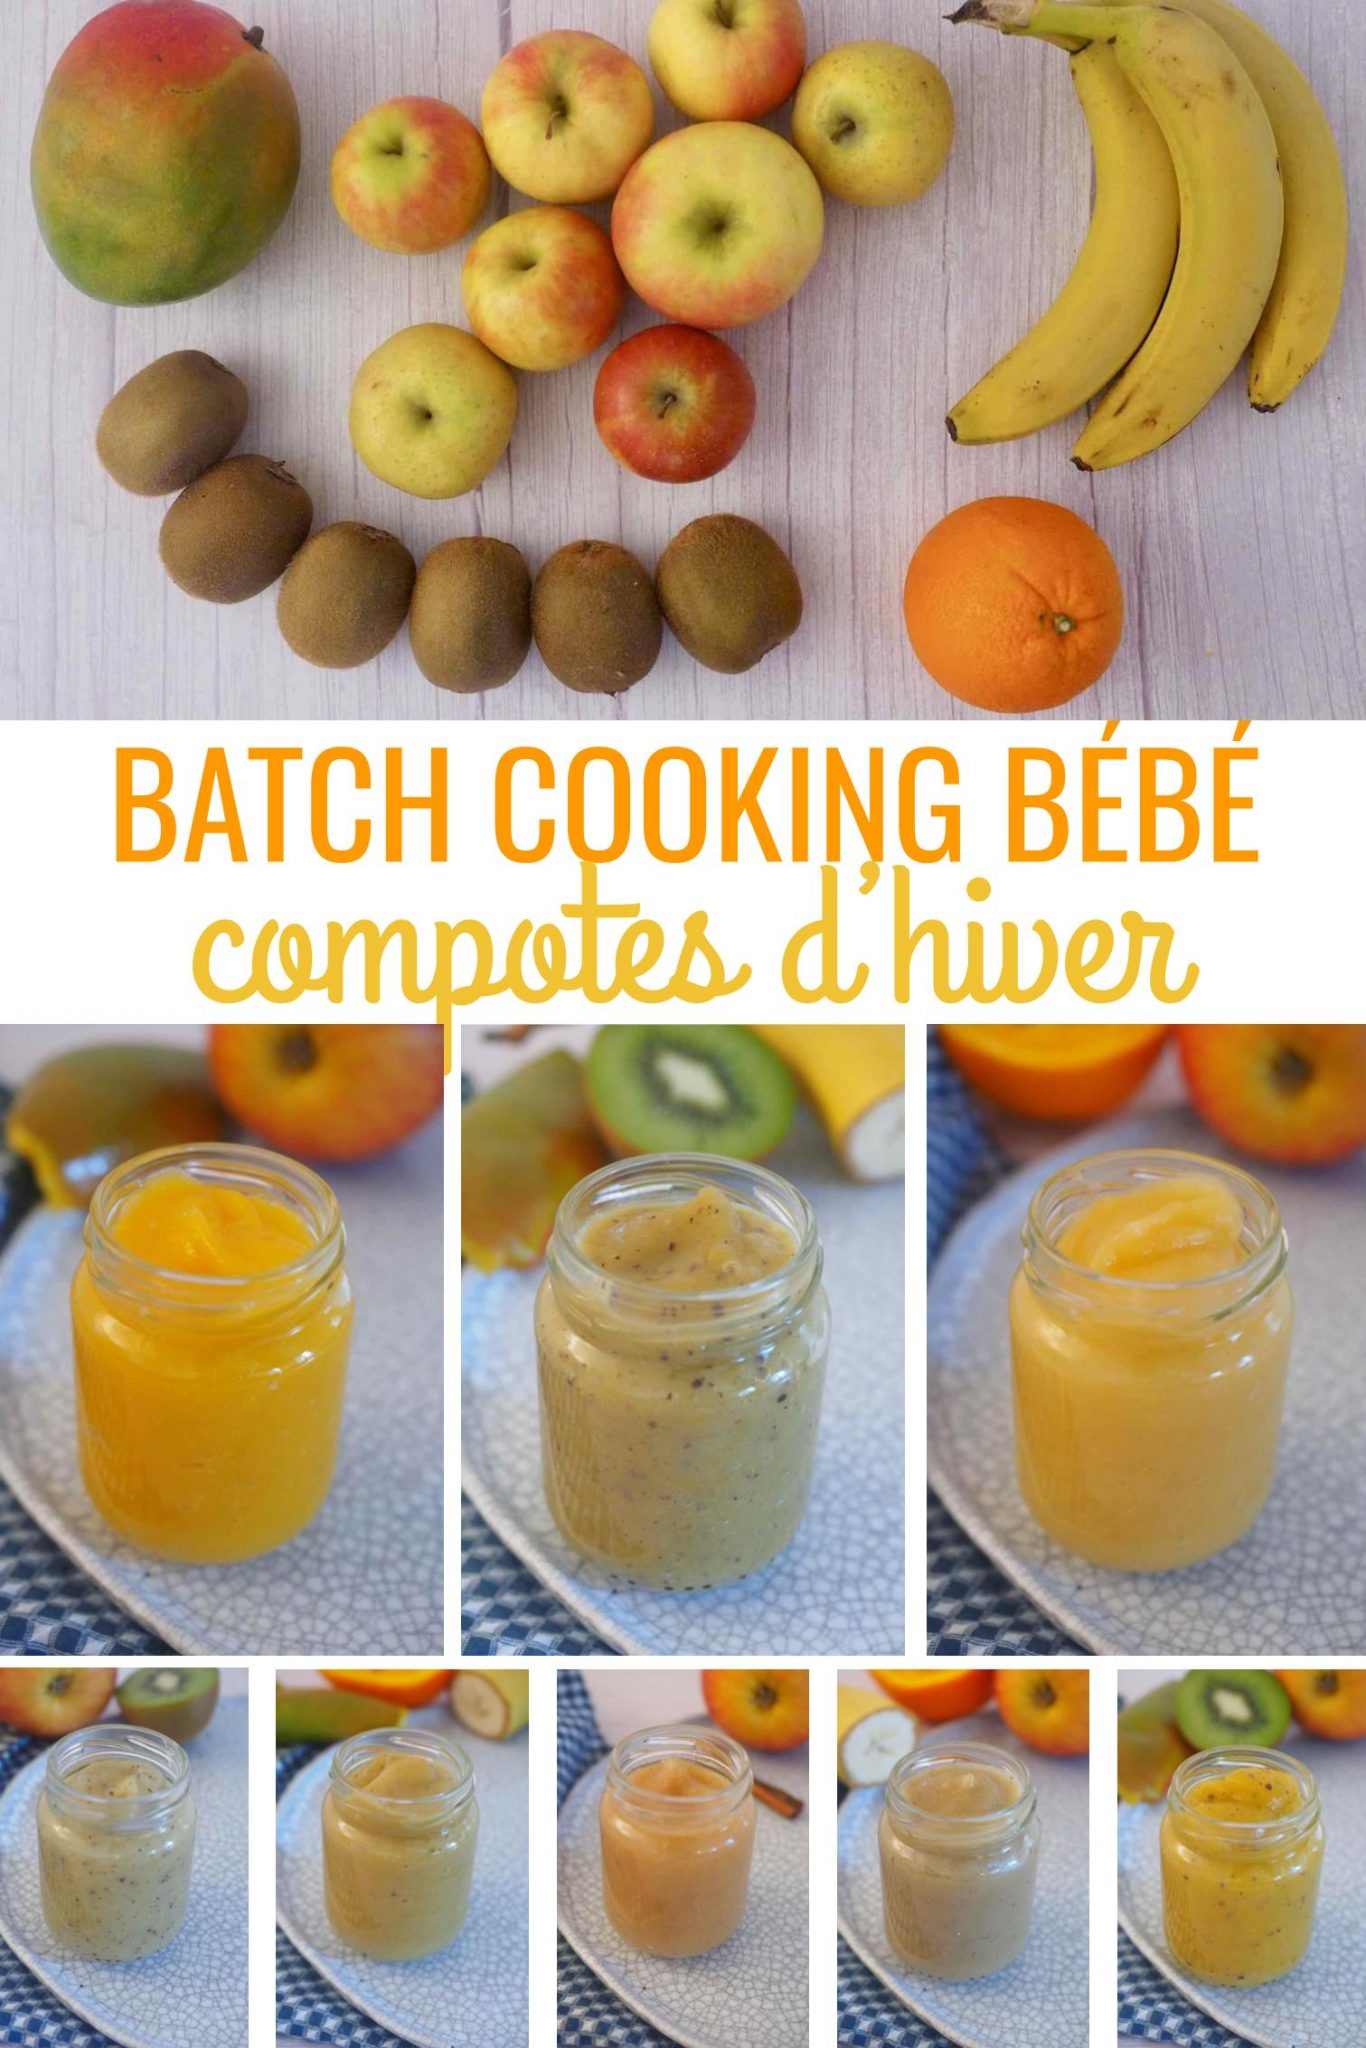 Batch Cooking - Compotes d'hiver